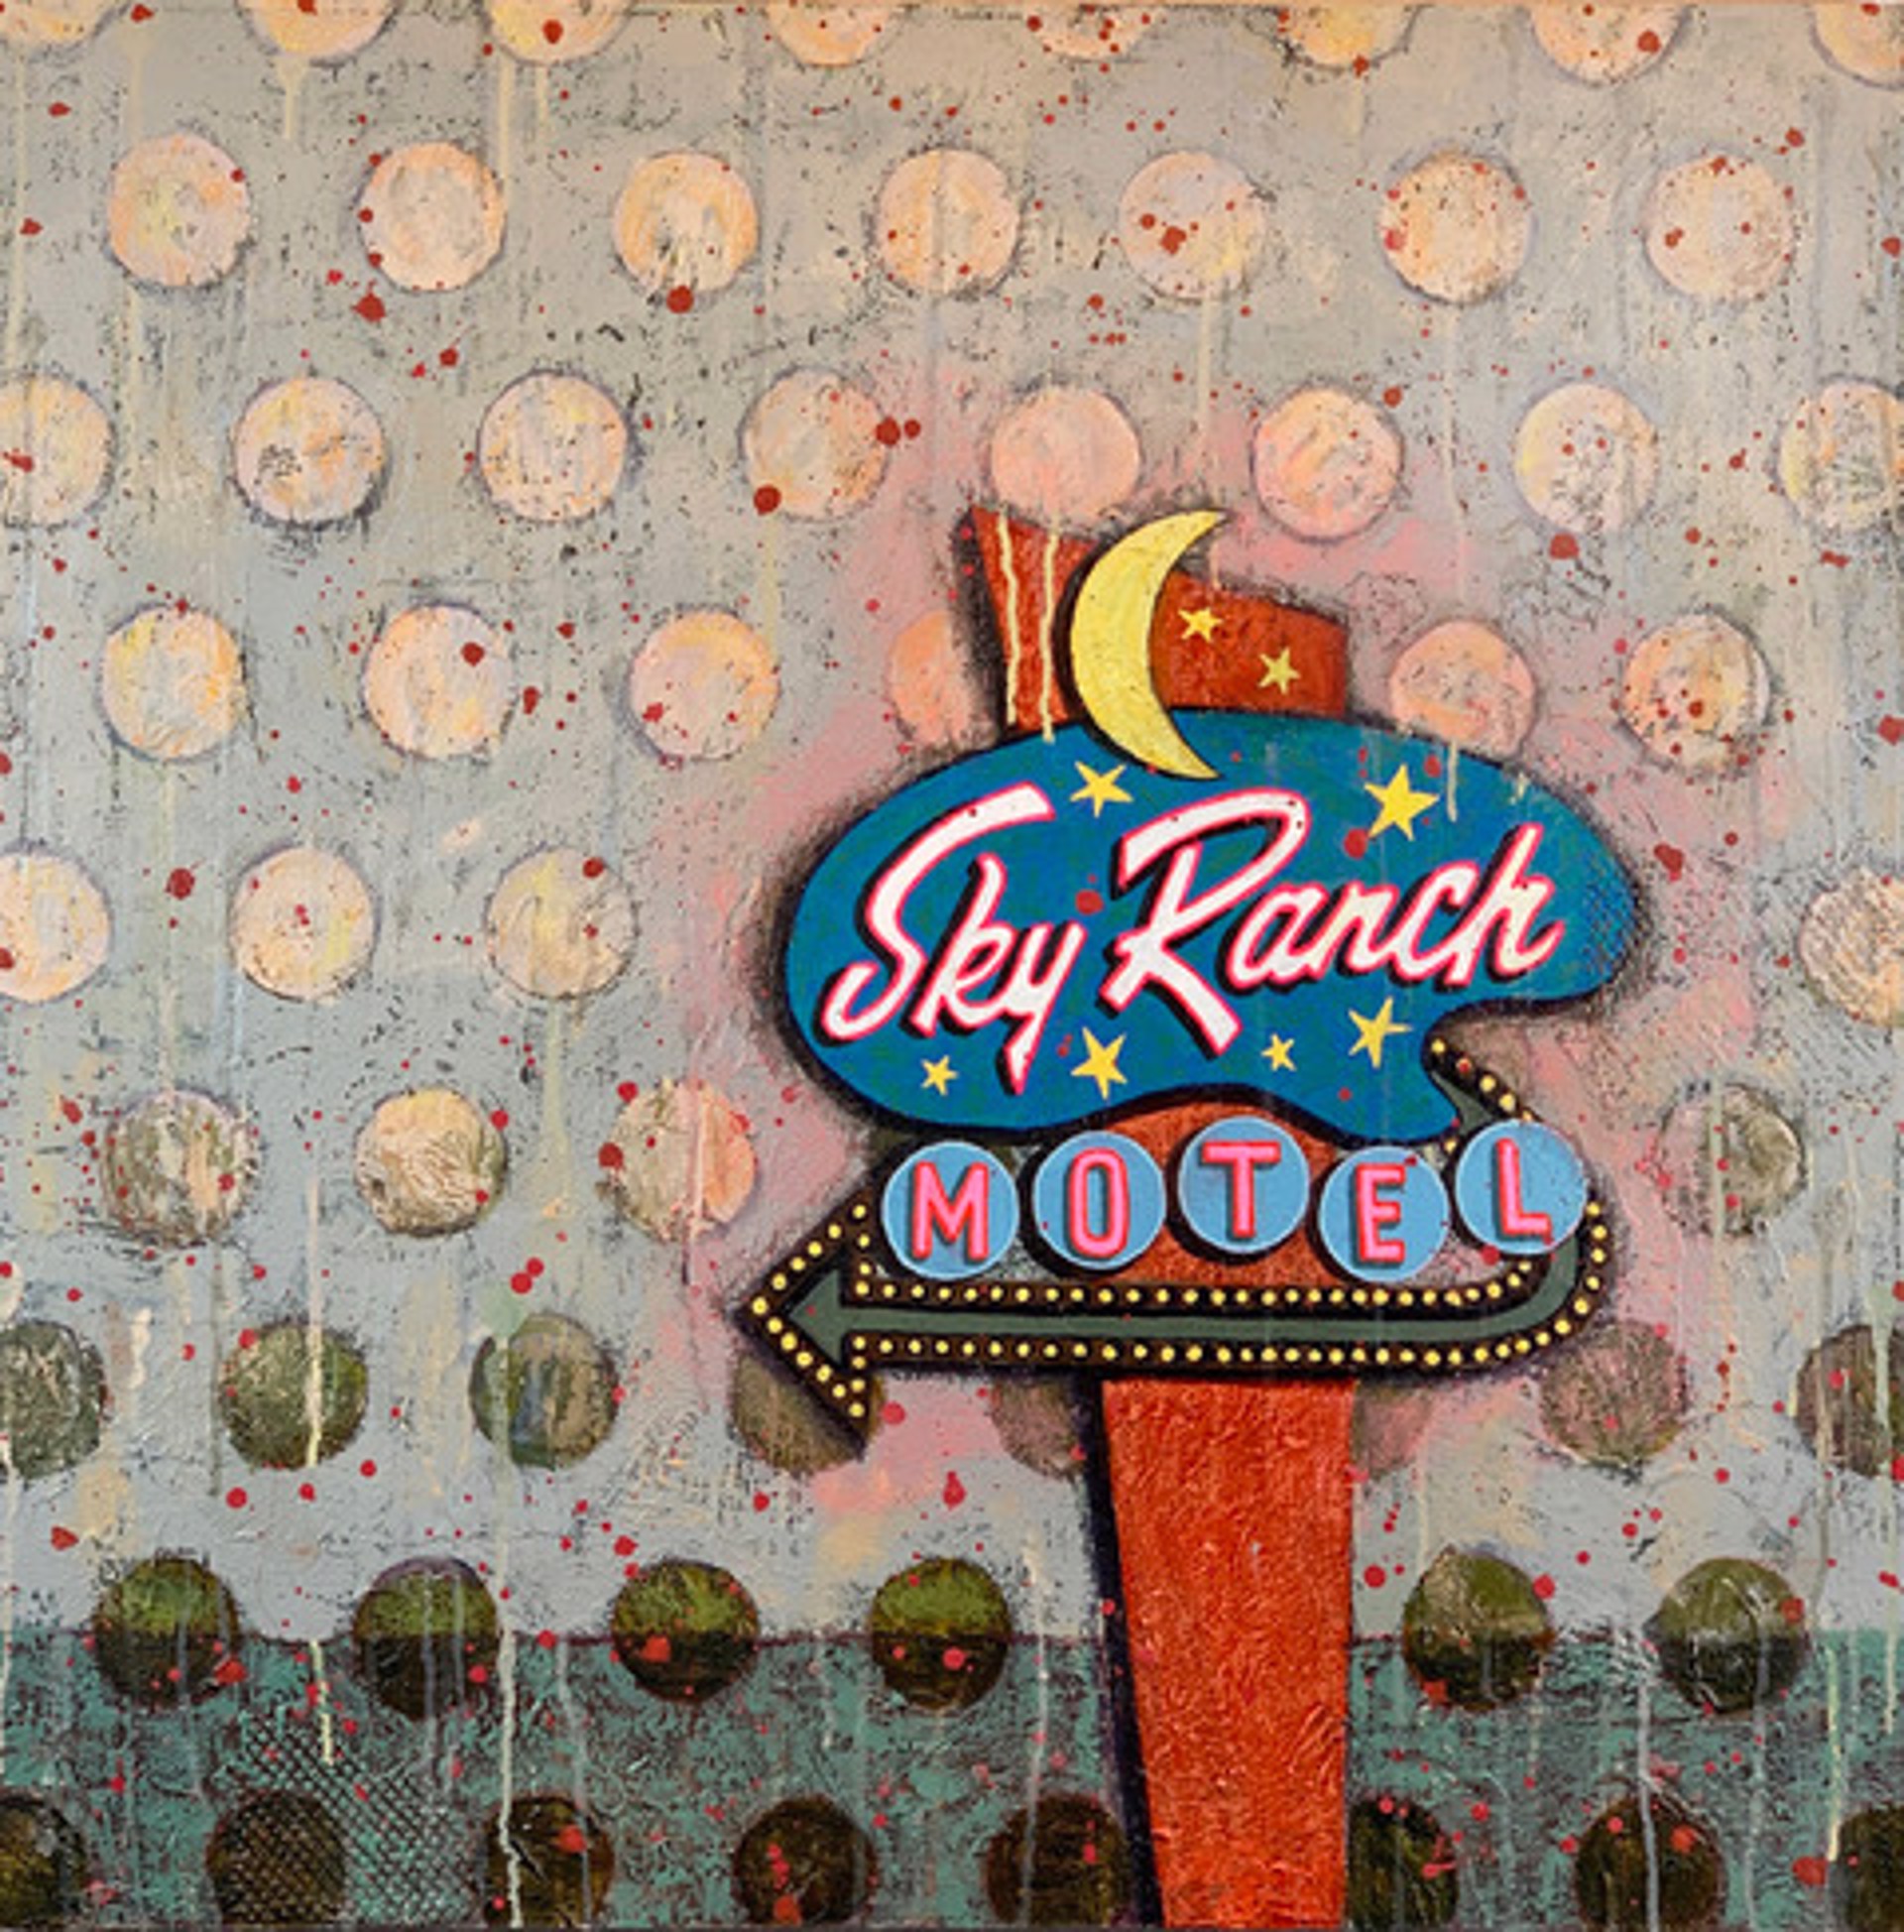 The Sky Ranch Motel, Dot Land by Rachel Paxton